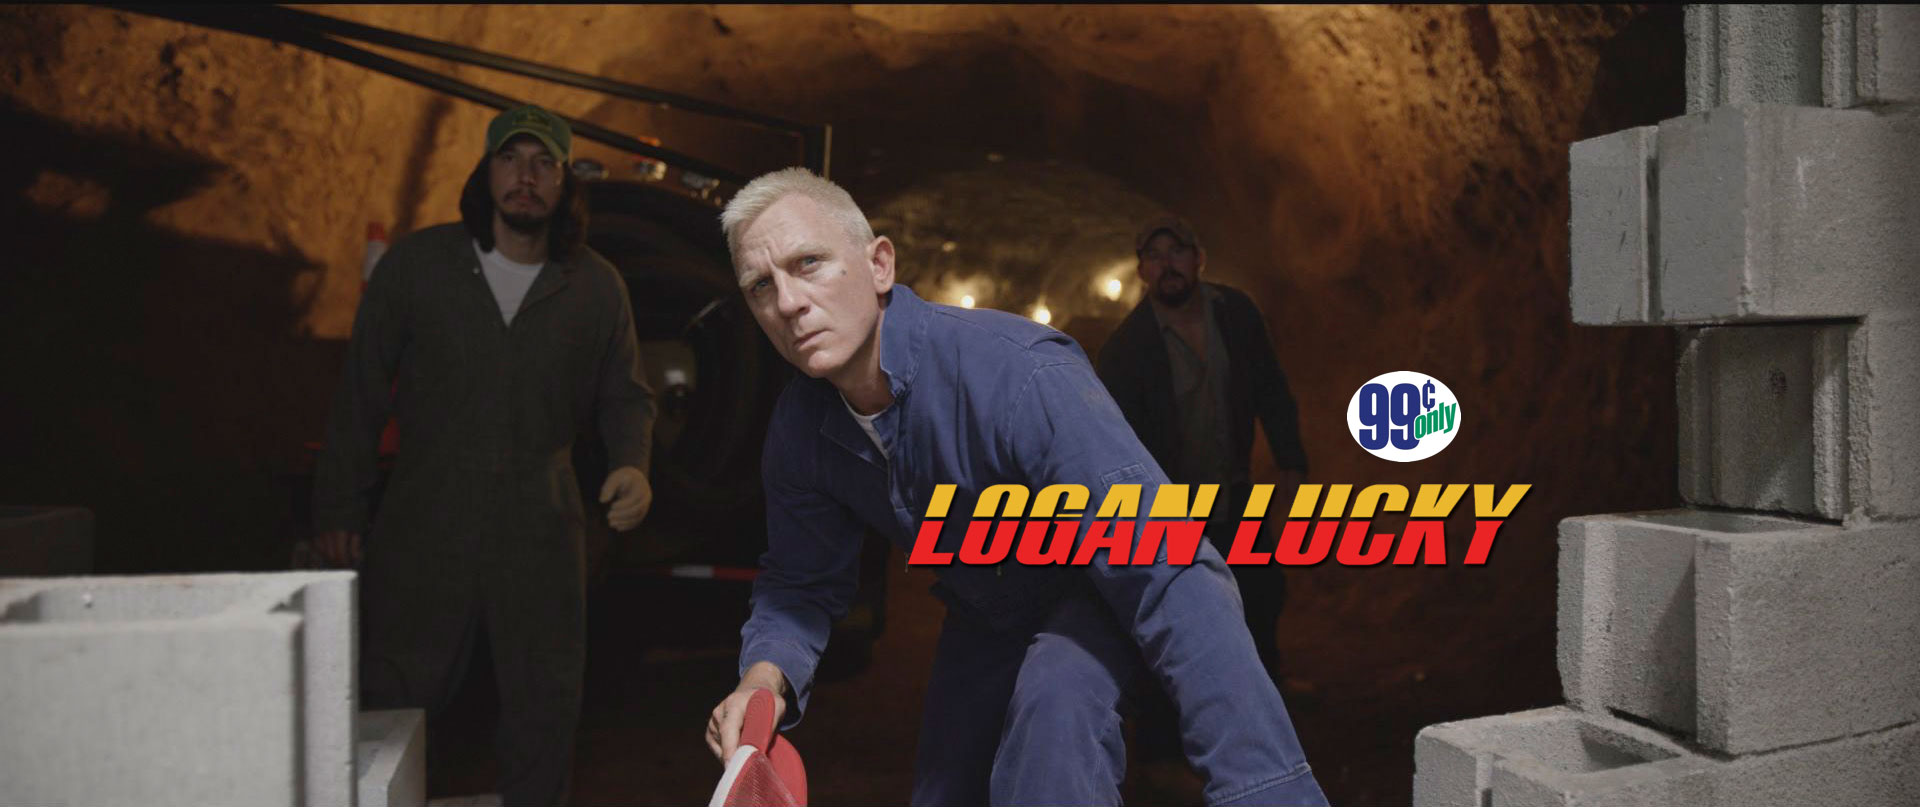 The itunes $0. 99 movie of the week: ‘logan lucky’